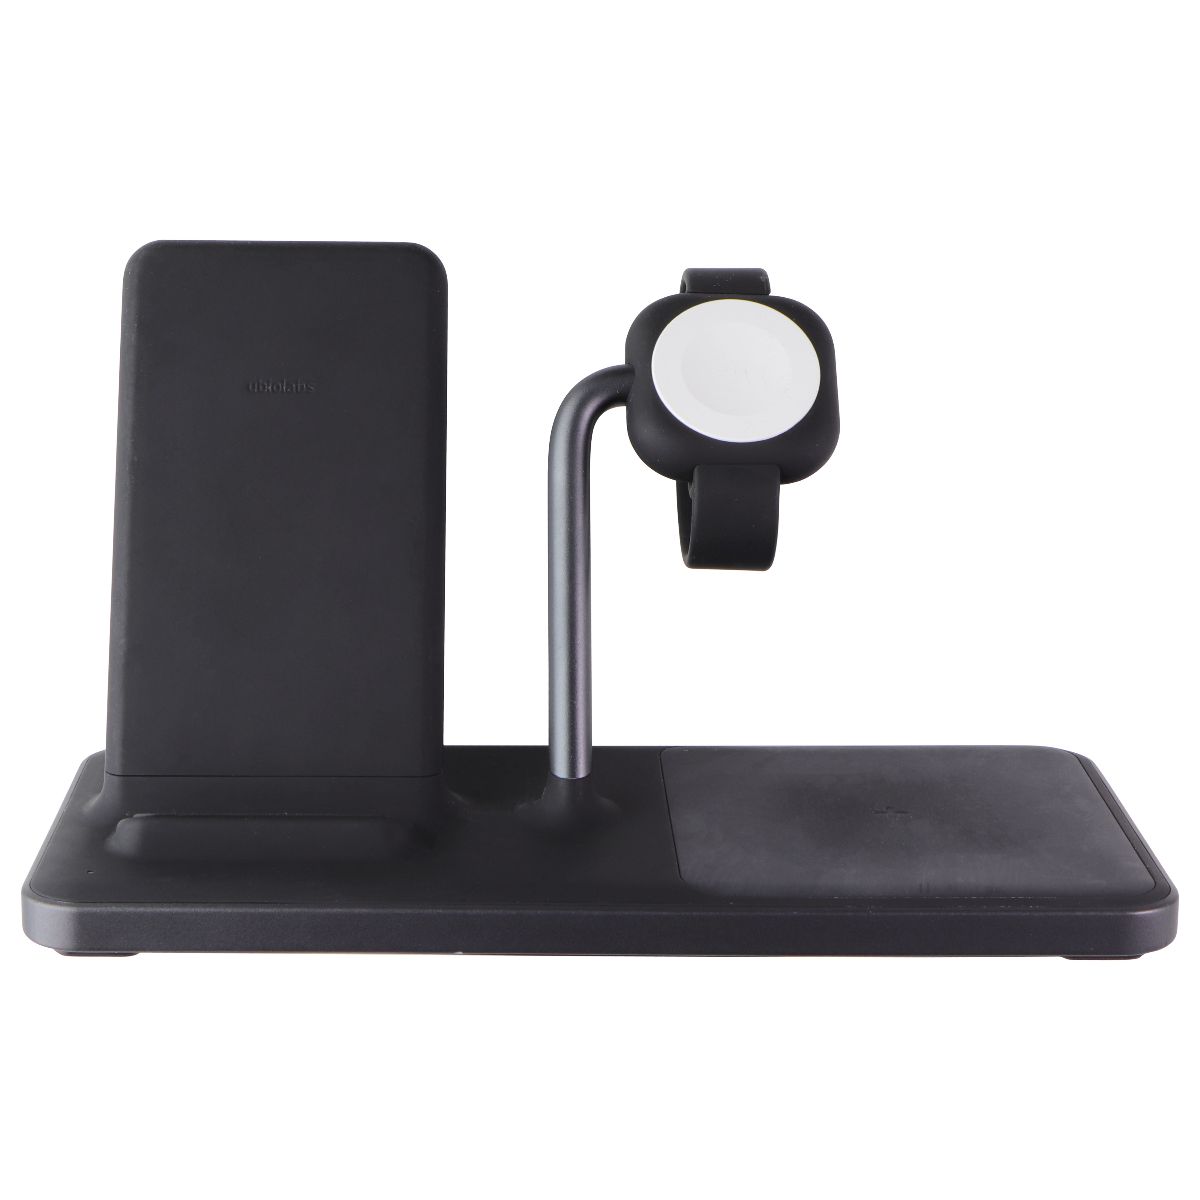 Ubiolabs 3-in-1 Wireless Charging Stand w/ USB-C for Qi & Apple Watch - Black